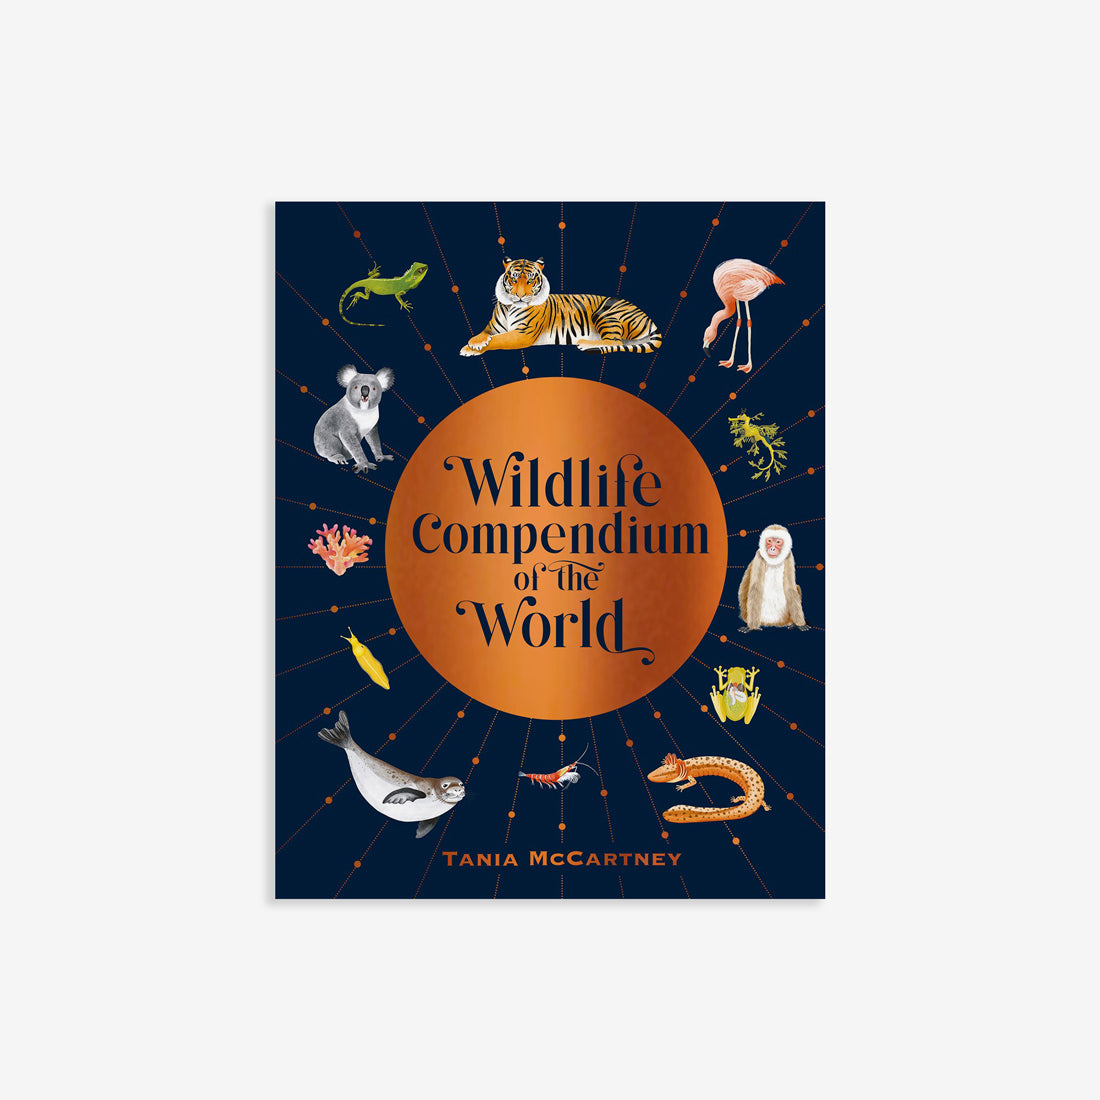 Wildlife Compendium of the World: Awe-Inspiring Animals from Every Continent